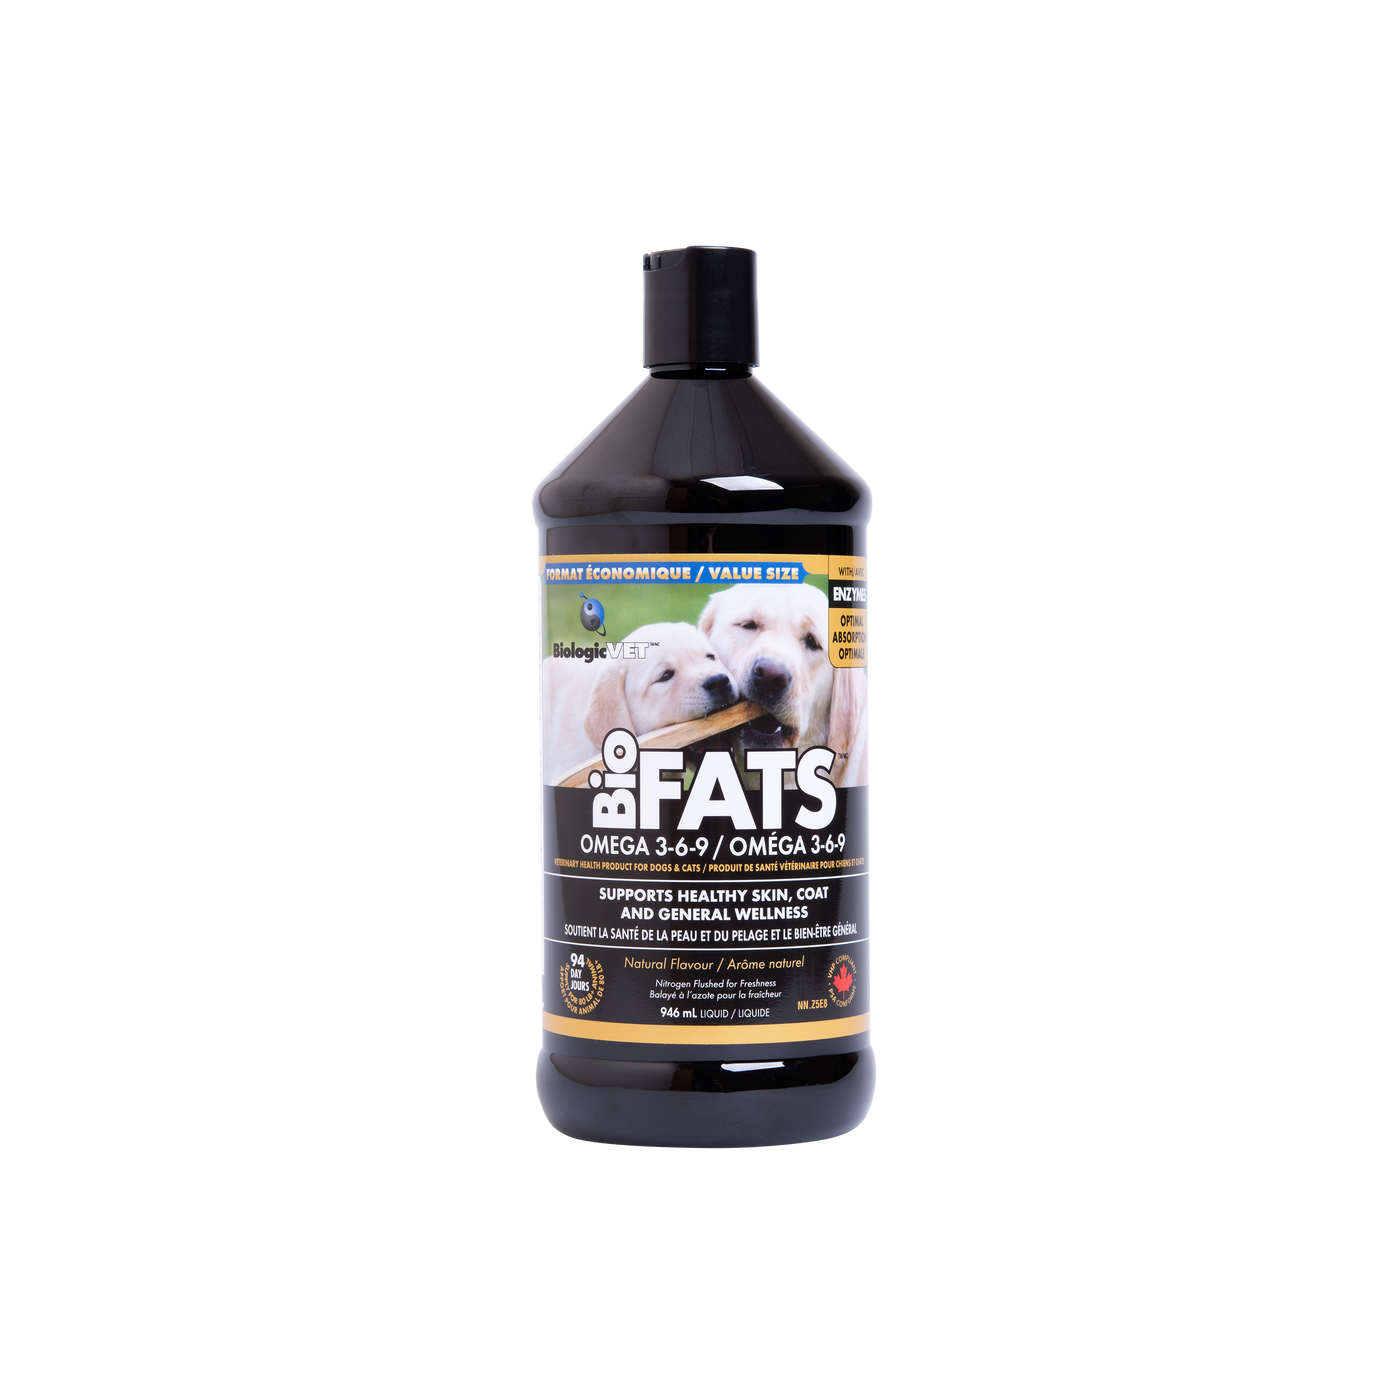 BiologicVet - BioFATS Omega 3-6-9 Fatty Acids with EPA and DHA Fish Oil for Dogs & Cats